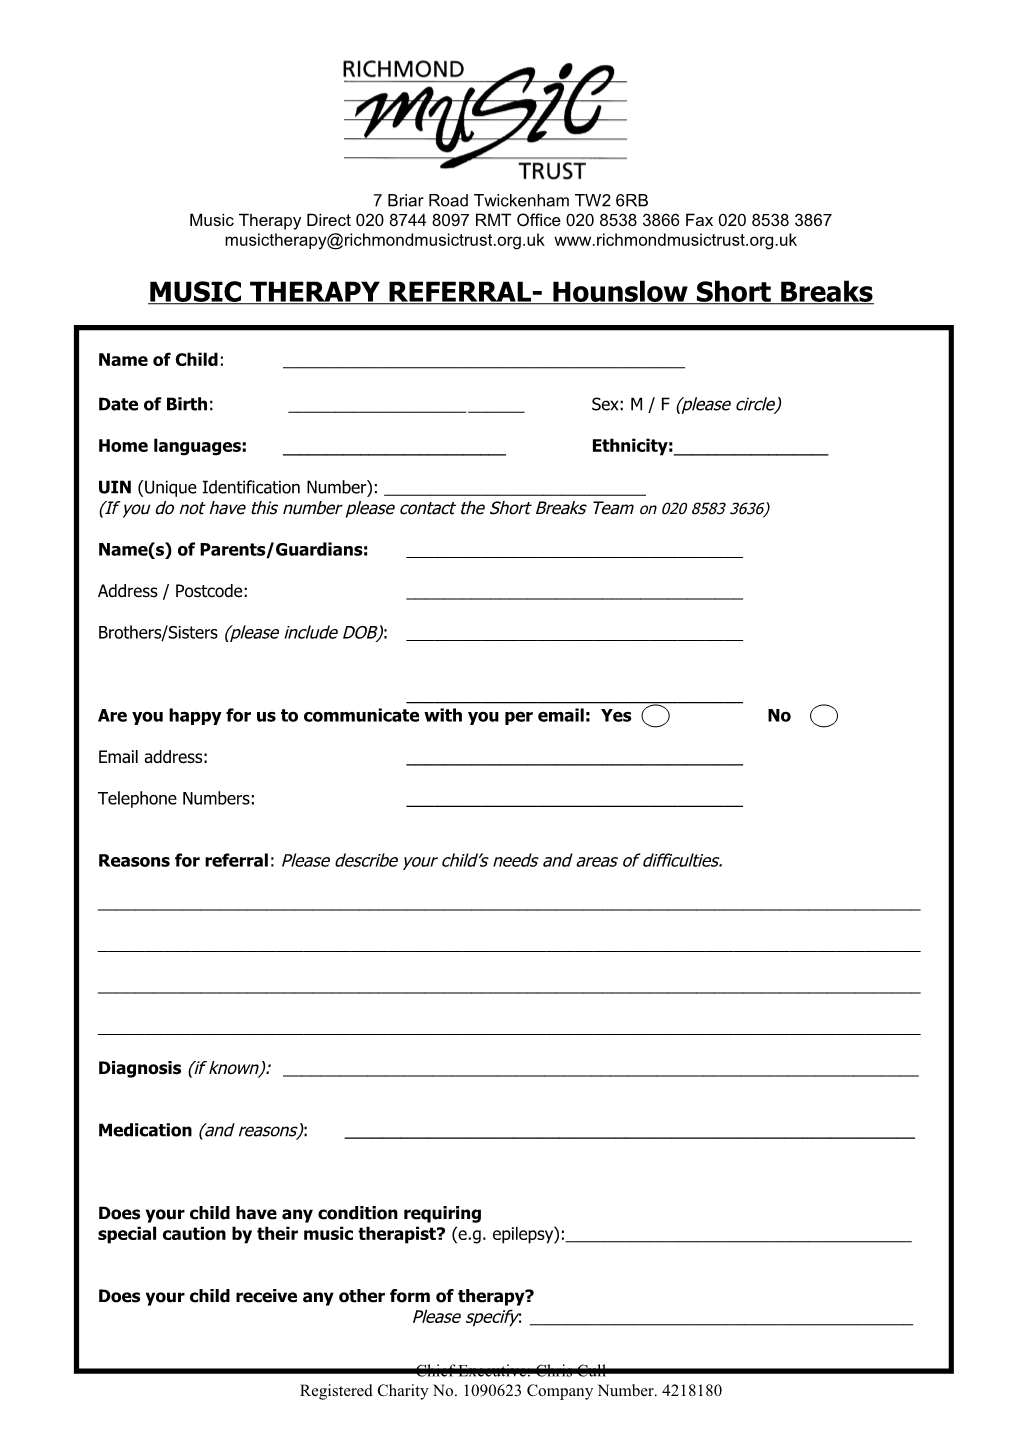 Music Therapy Referral